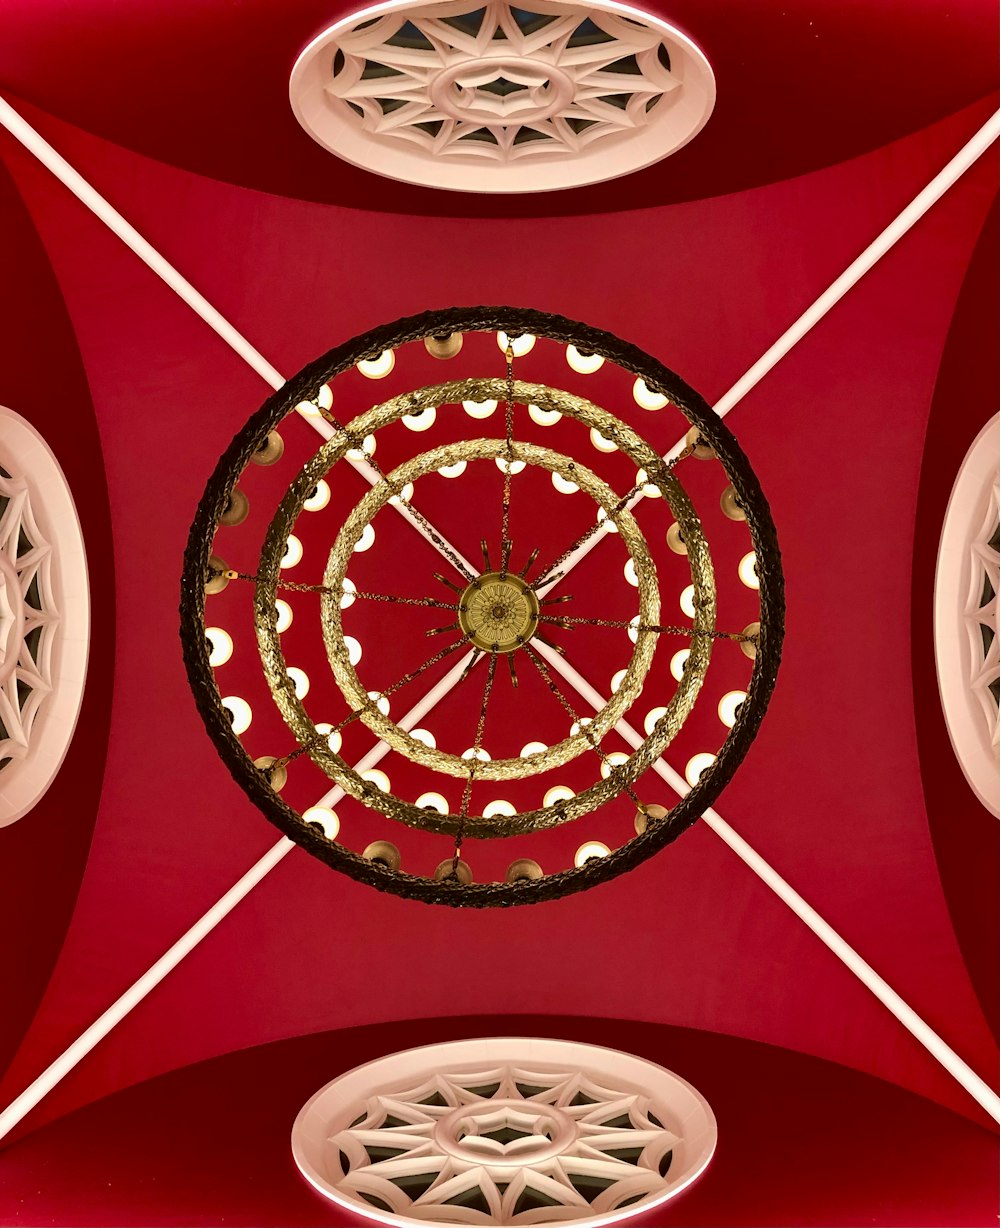 a red ceiling with a circular design on it